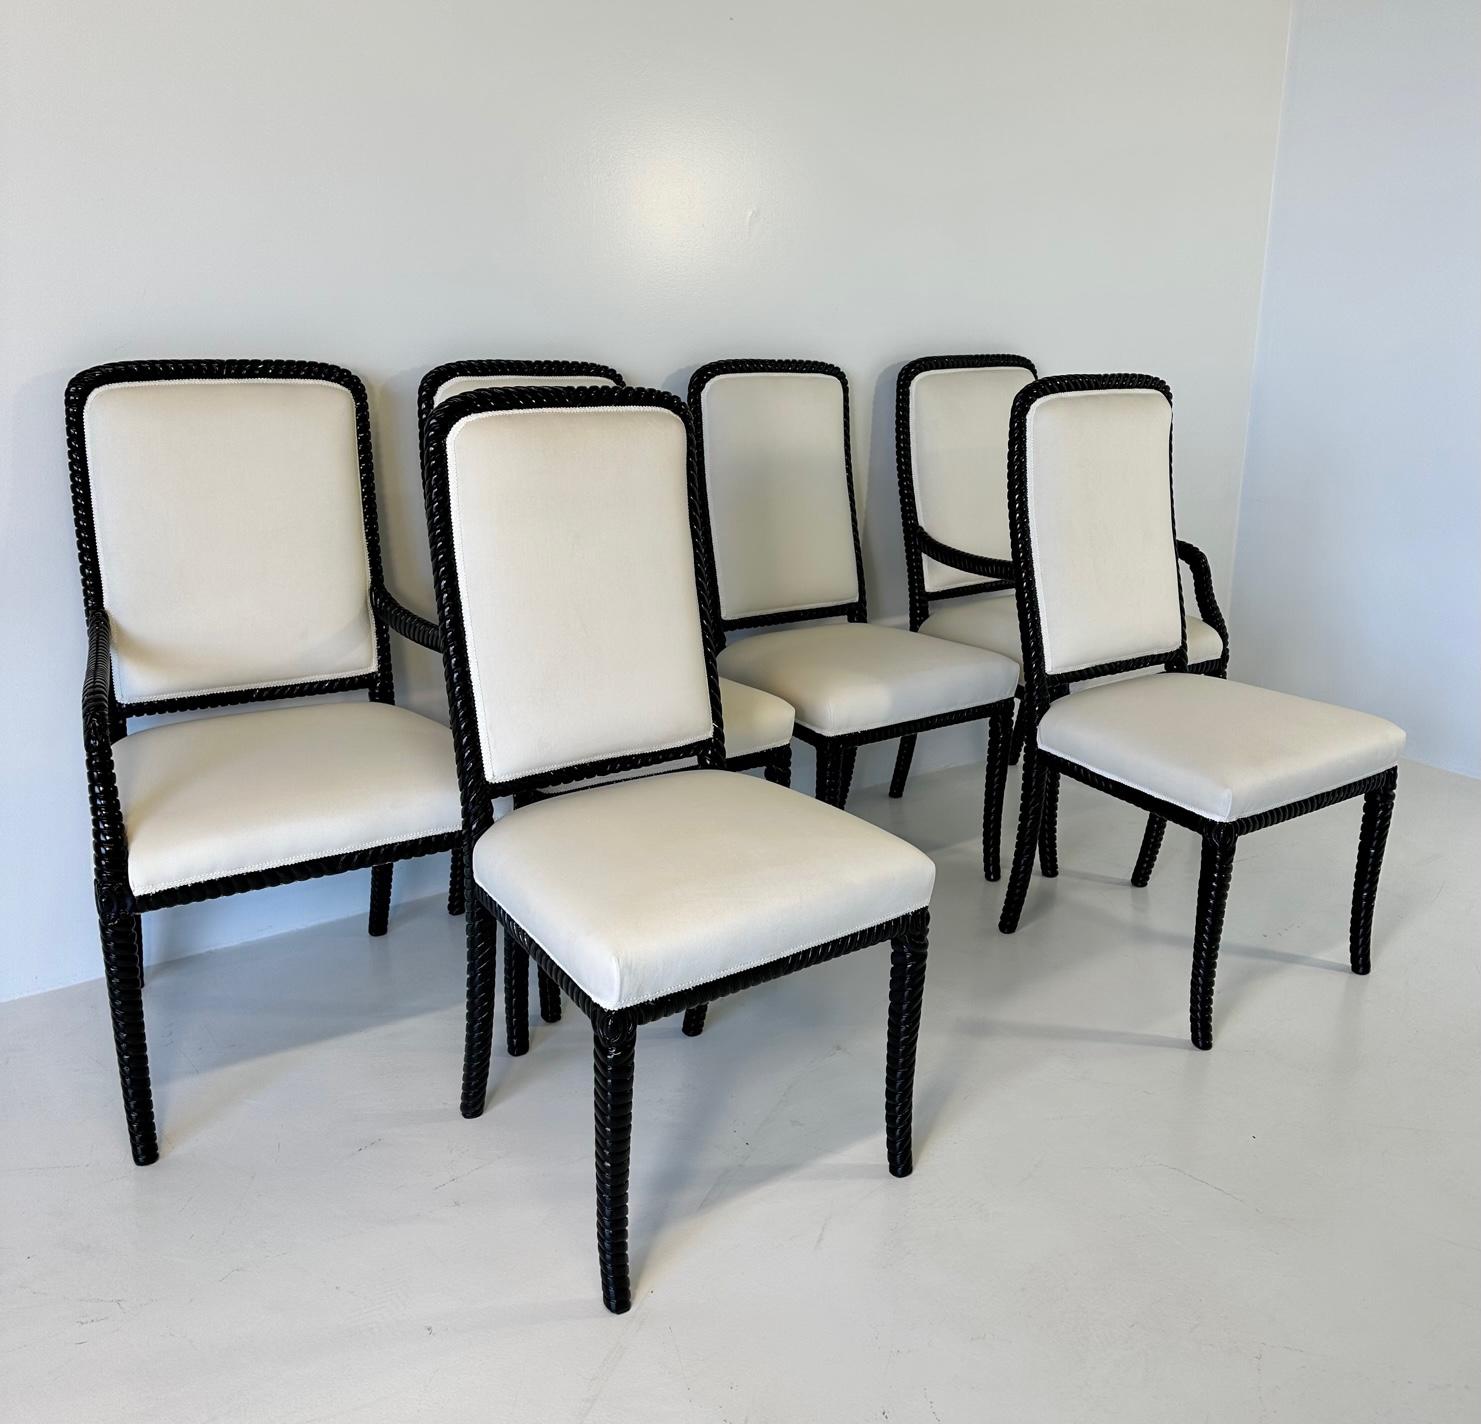 This set of six Art Deco style chairs was produced in Italy. 
The set is composed by 4 chairs and 2 capital chairs with arms. 
All of the six are covered with a fine cream velvet and the structure is in black lacquered wood. 
Chairs: 52 cm x 57cm